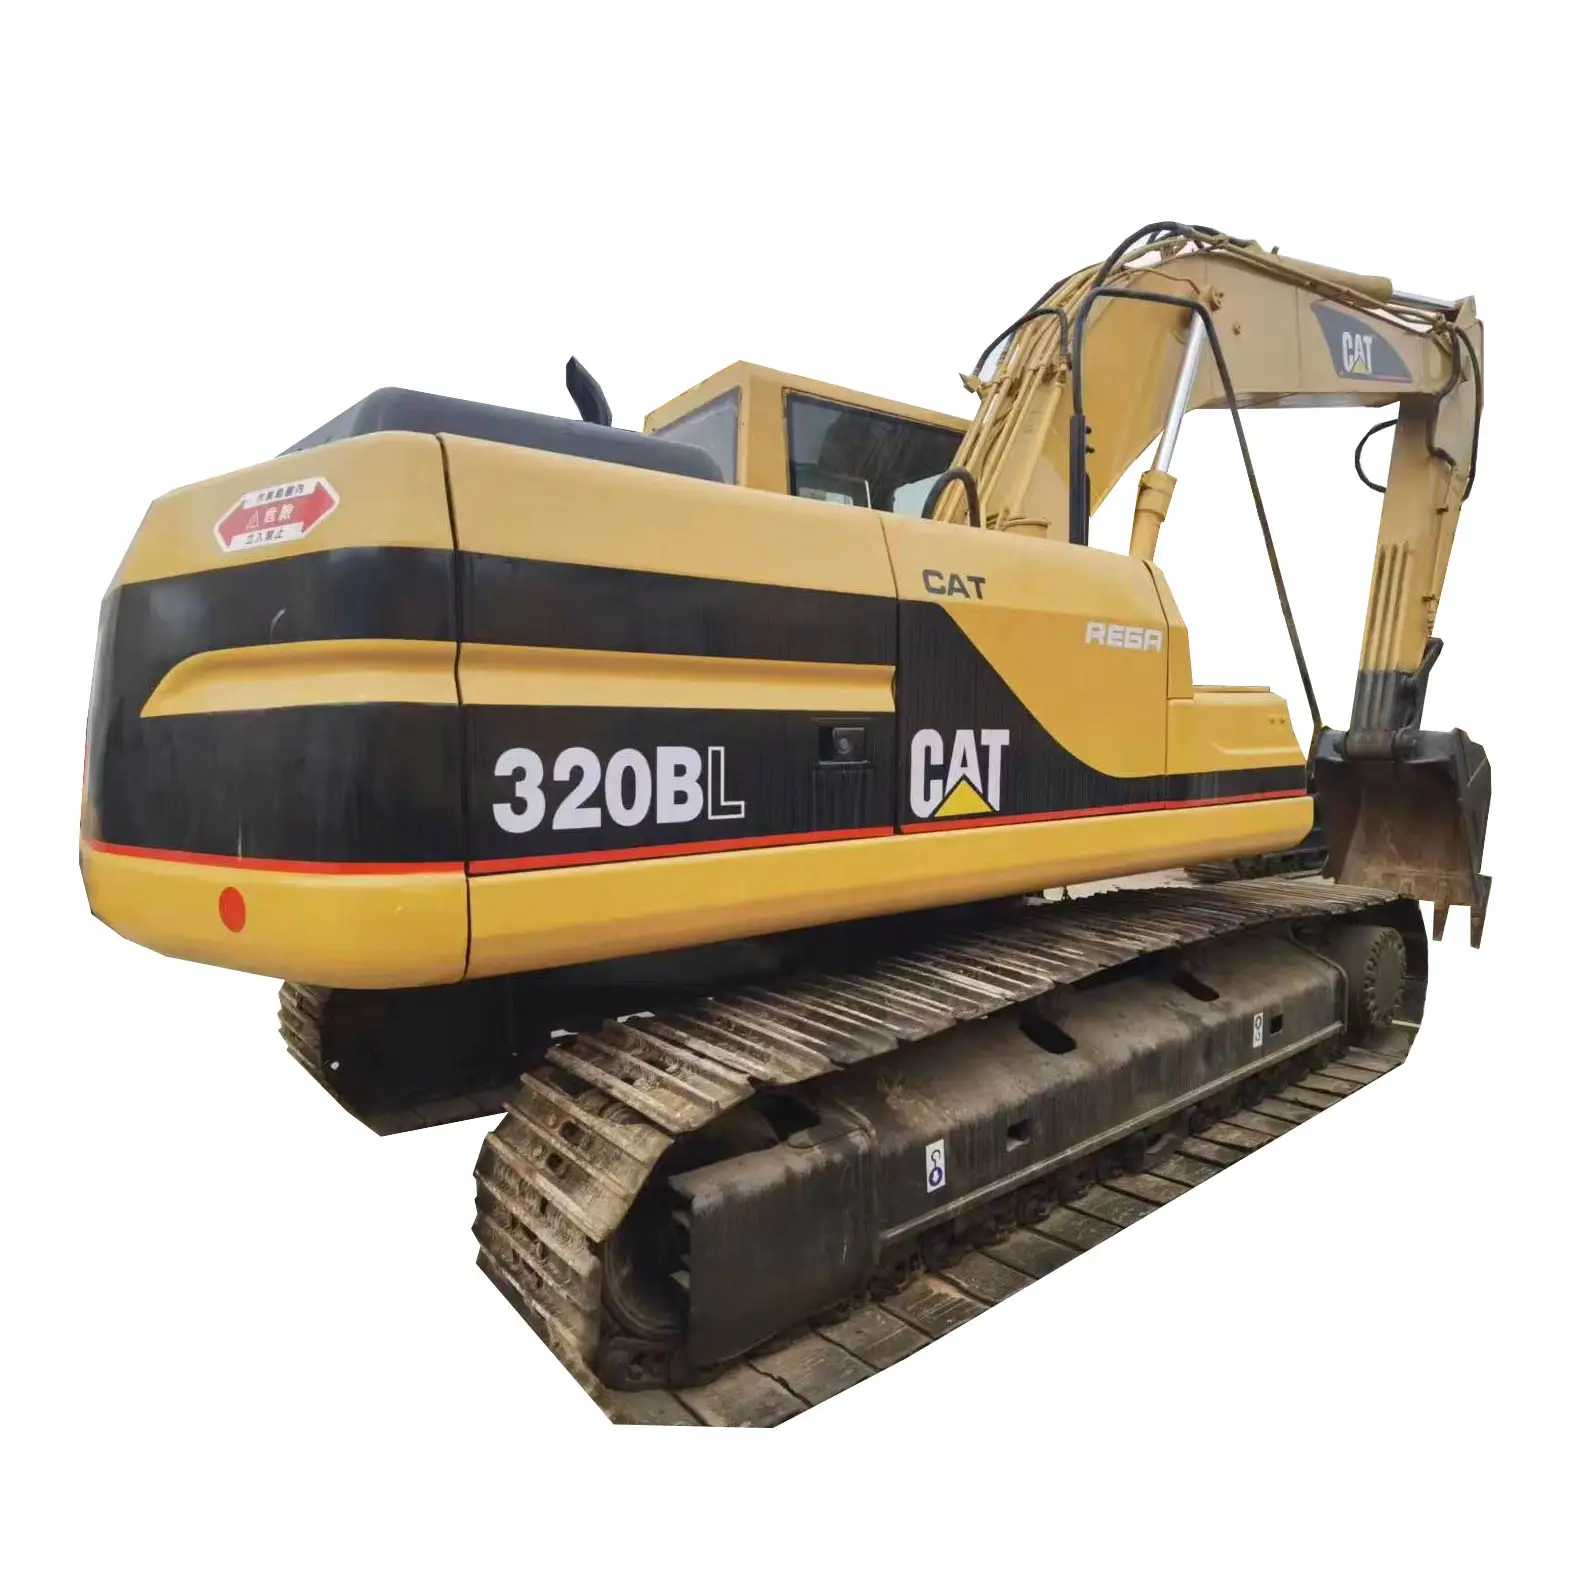 Second Hand CAT Caterpillar 320BL Excavator In Original Painting Used Caterpillar CAT 320bl 320 Excavator With Good Condition